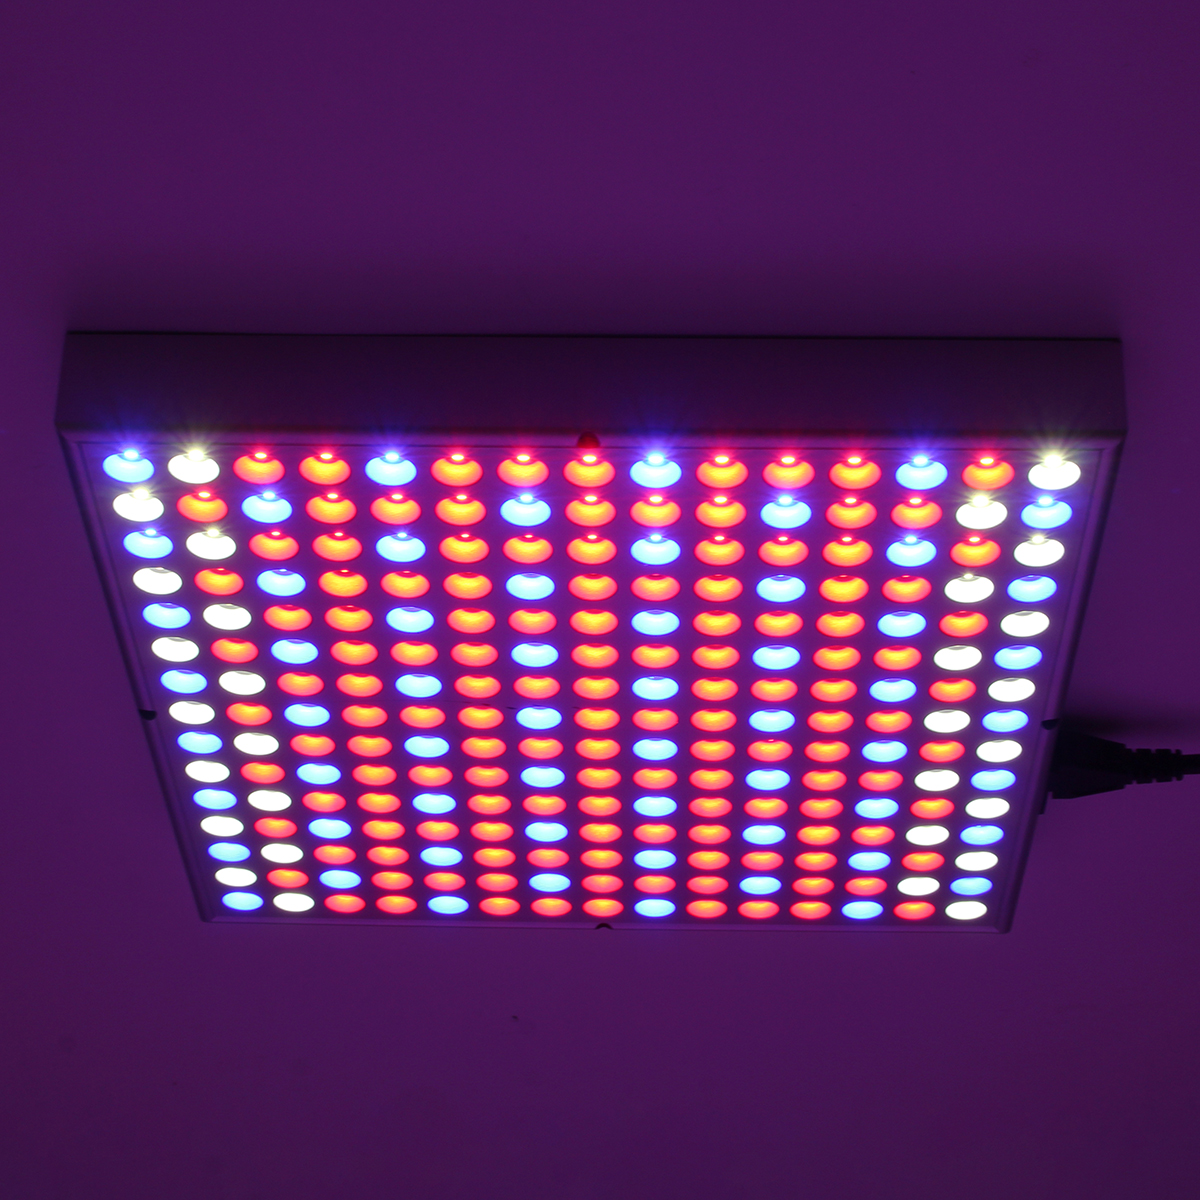 1200W-LED-Spectrum-Grow-Light-Growing-Lamp-for-Hydroponic-Indoor-Plant-1816509-7